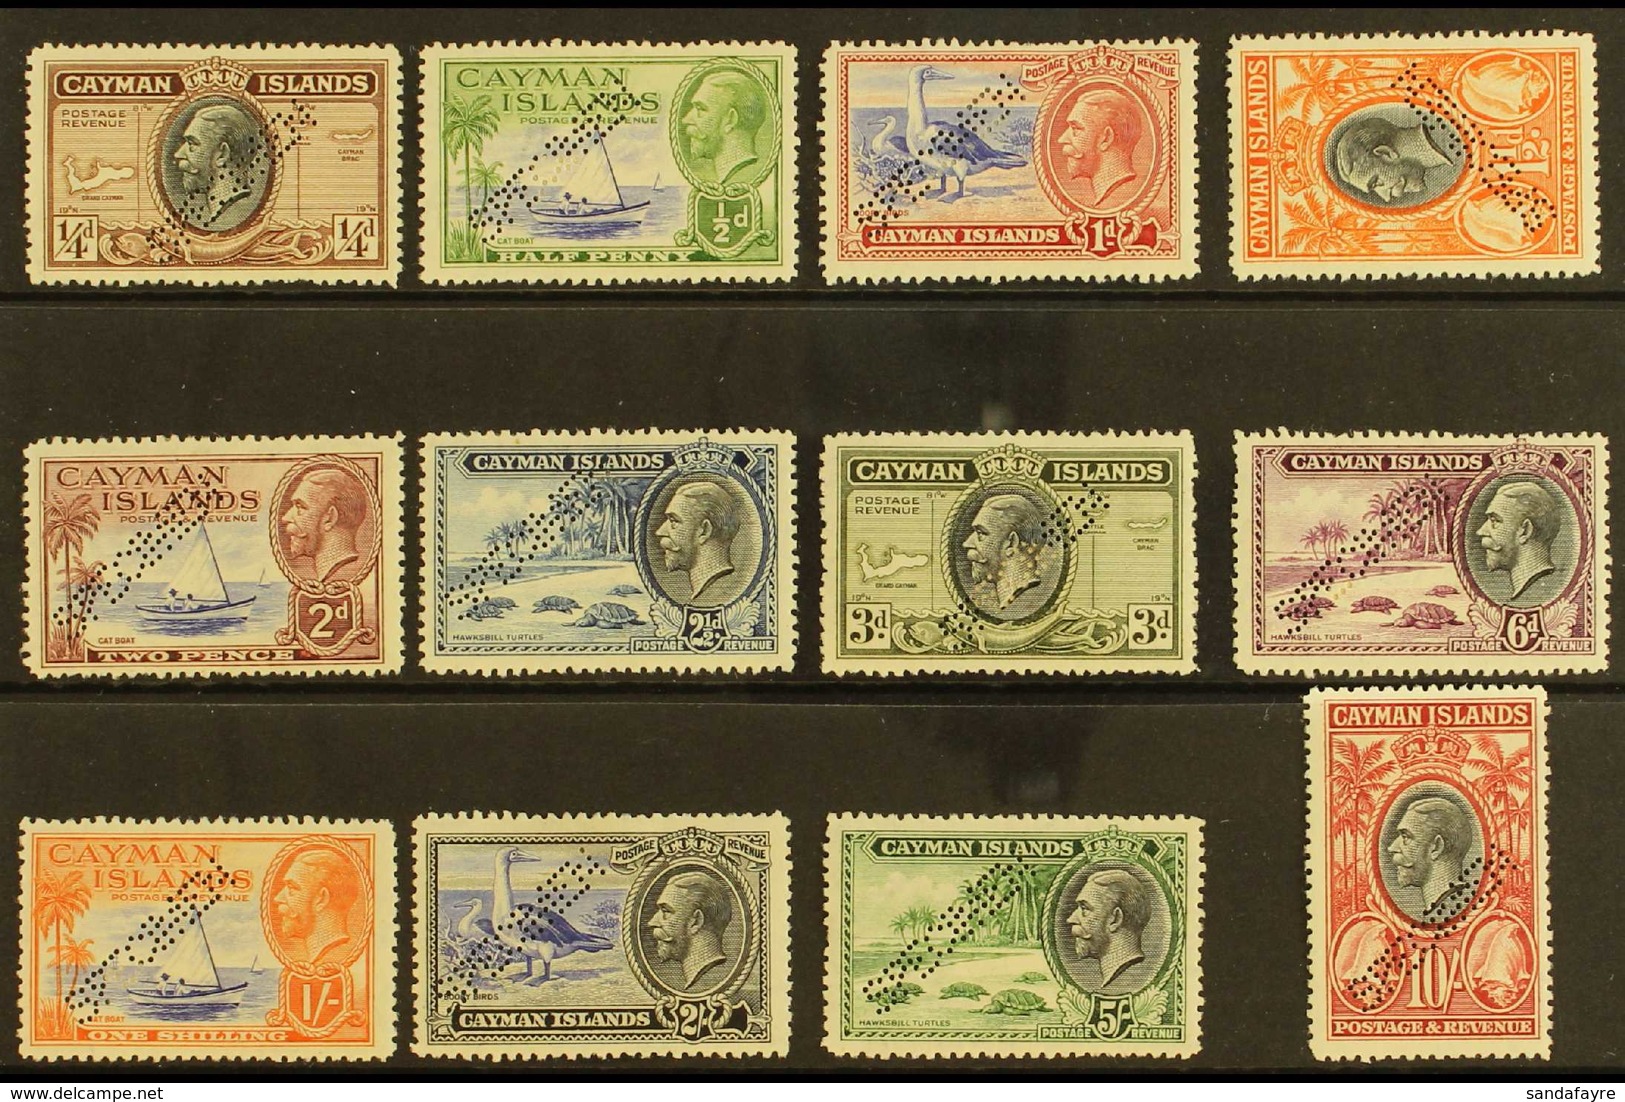 1935 Pictorial Definitives Complete Set With "SPECIMEN" Perfin, SG 96s/107s, ½d Value With Small Thin, Otherwise Fine Mi - Cayman Islands